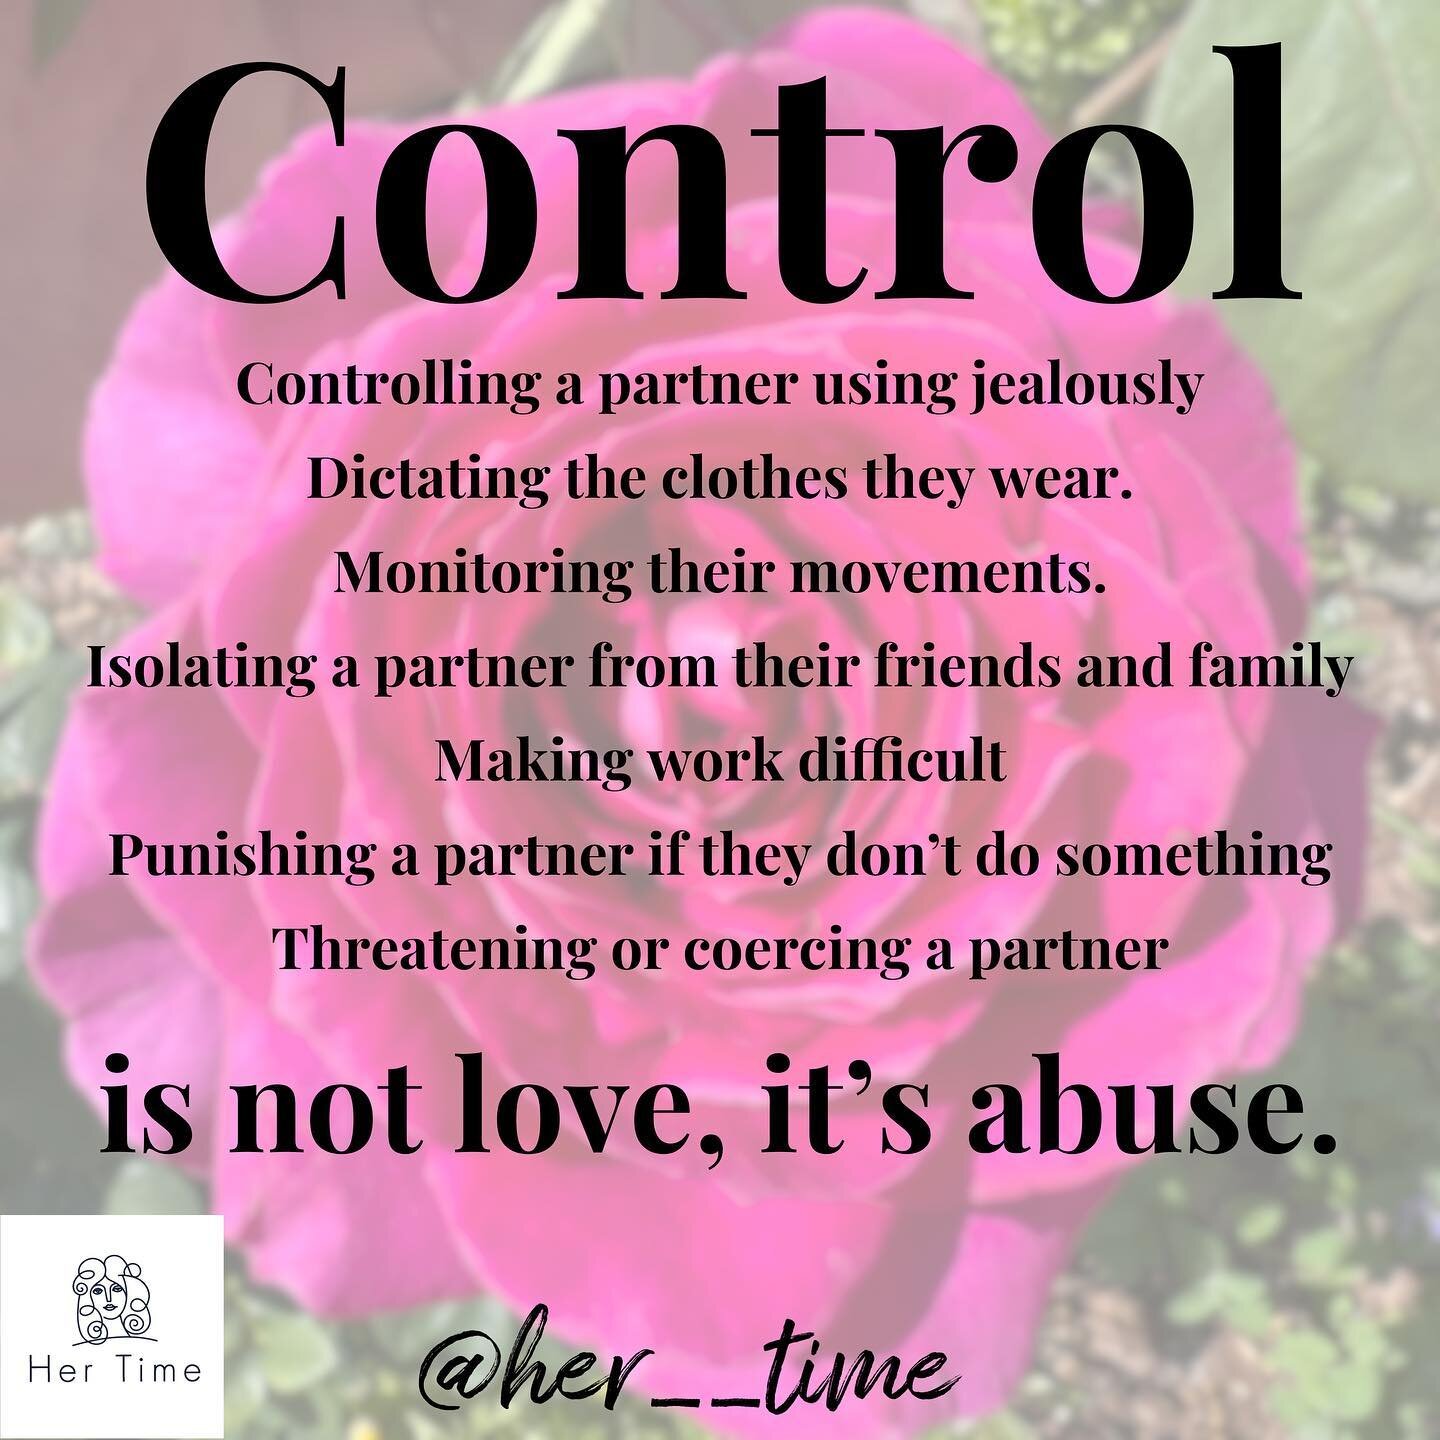 Controlling an intimate partner is not love, it&rsquo;s abuse. 

Overtime it stops you from being who you really are, and you become who your partner needs you to be. 

Controlling a partner using jealously.

Constantly being accused of cheating

Dic